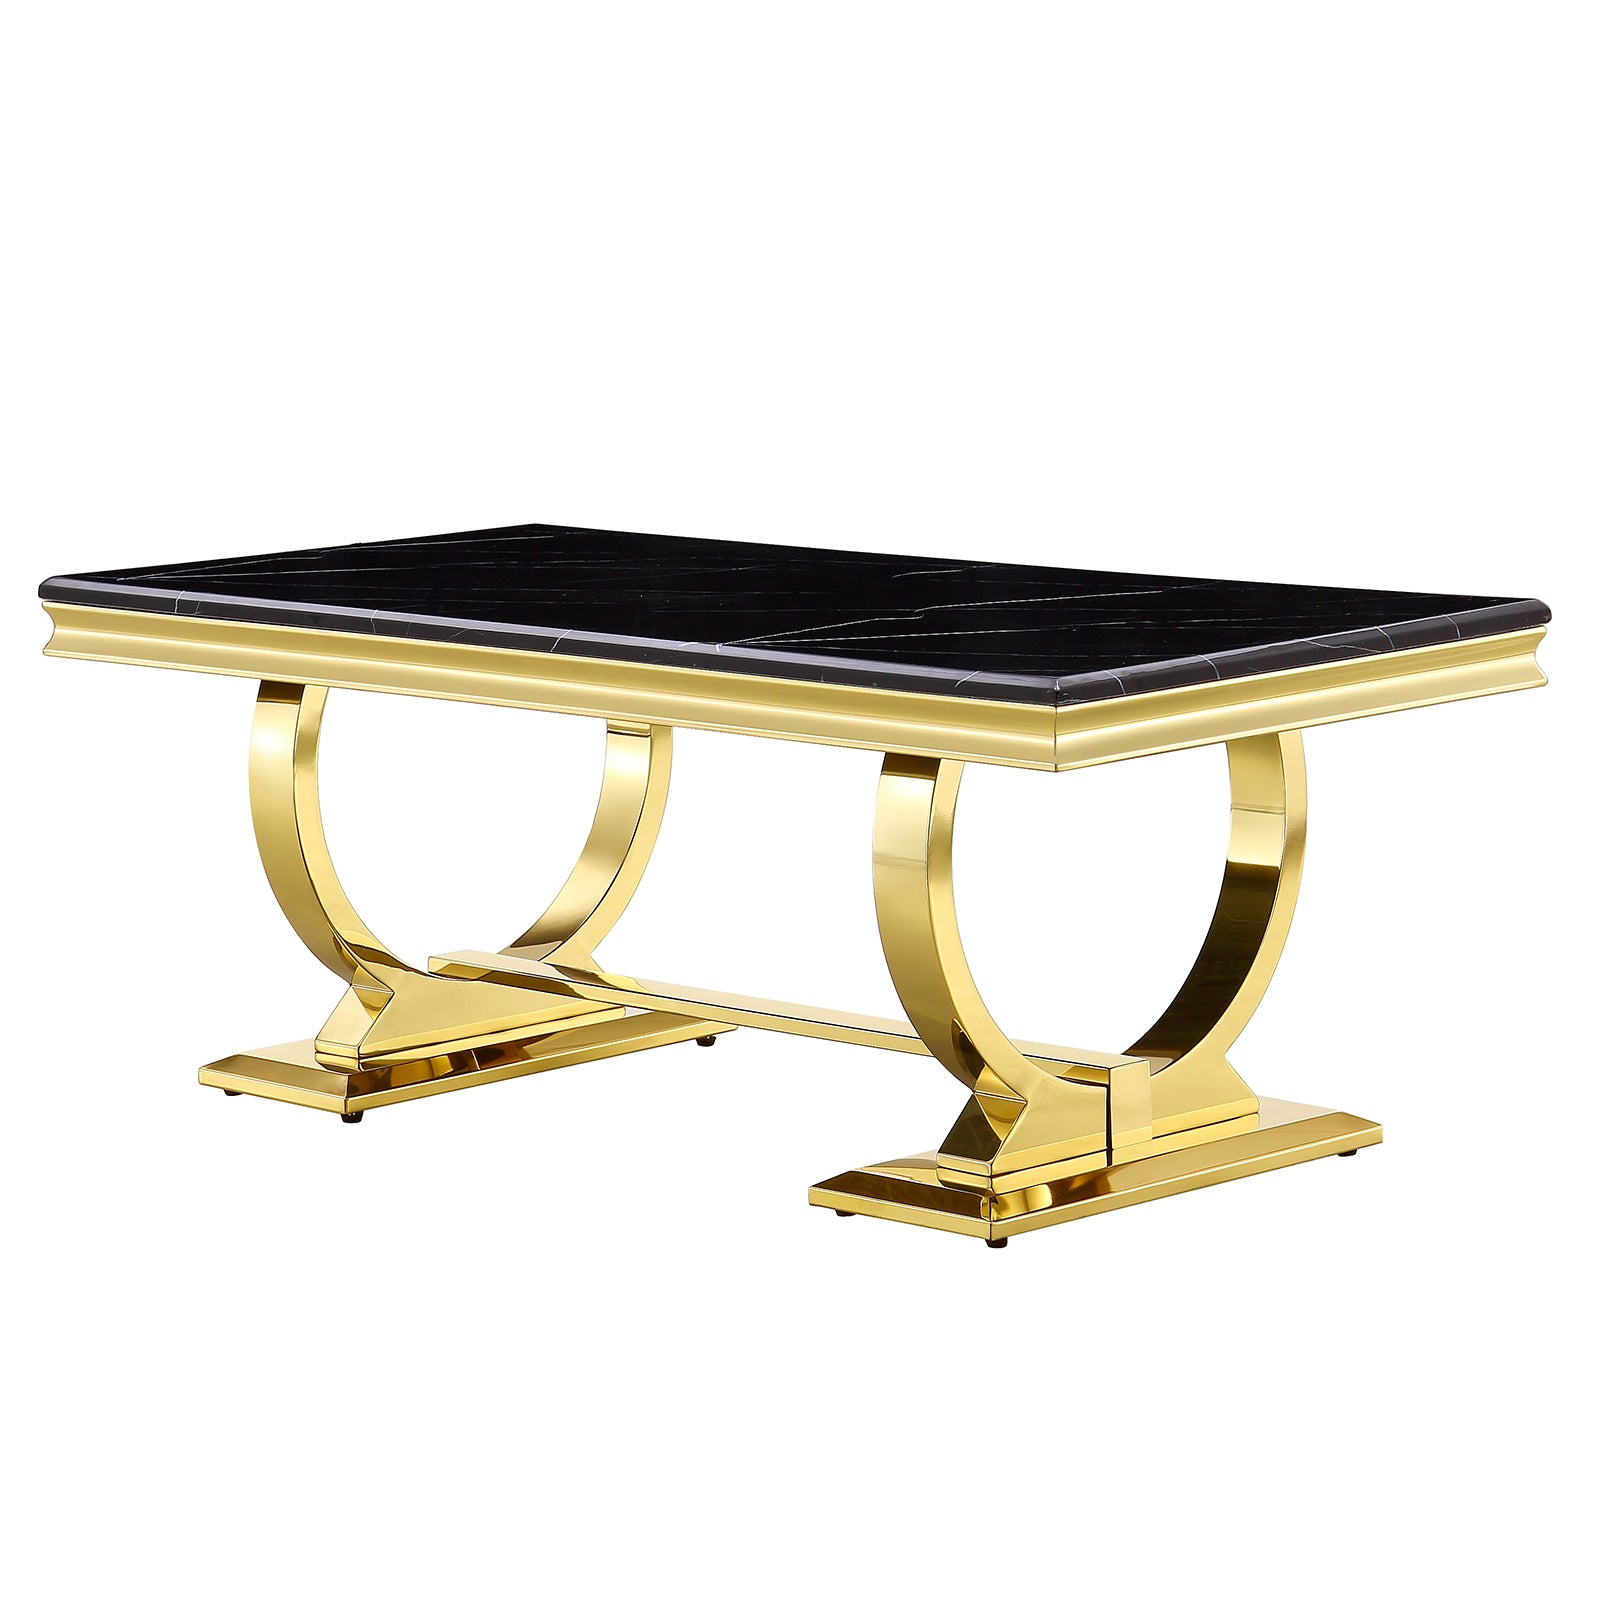 Add a Touch of Elegance to Your Living Space with a Golden Coffee Table